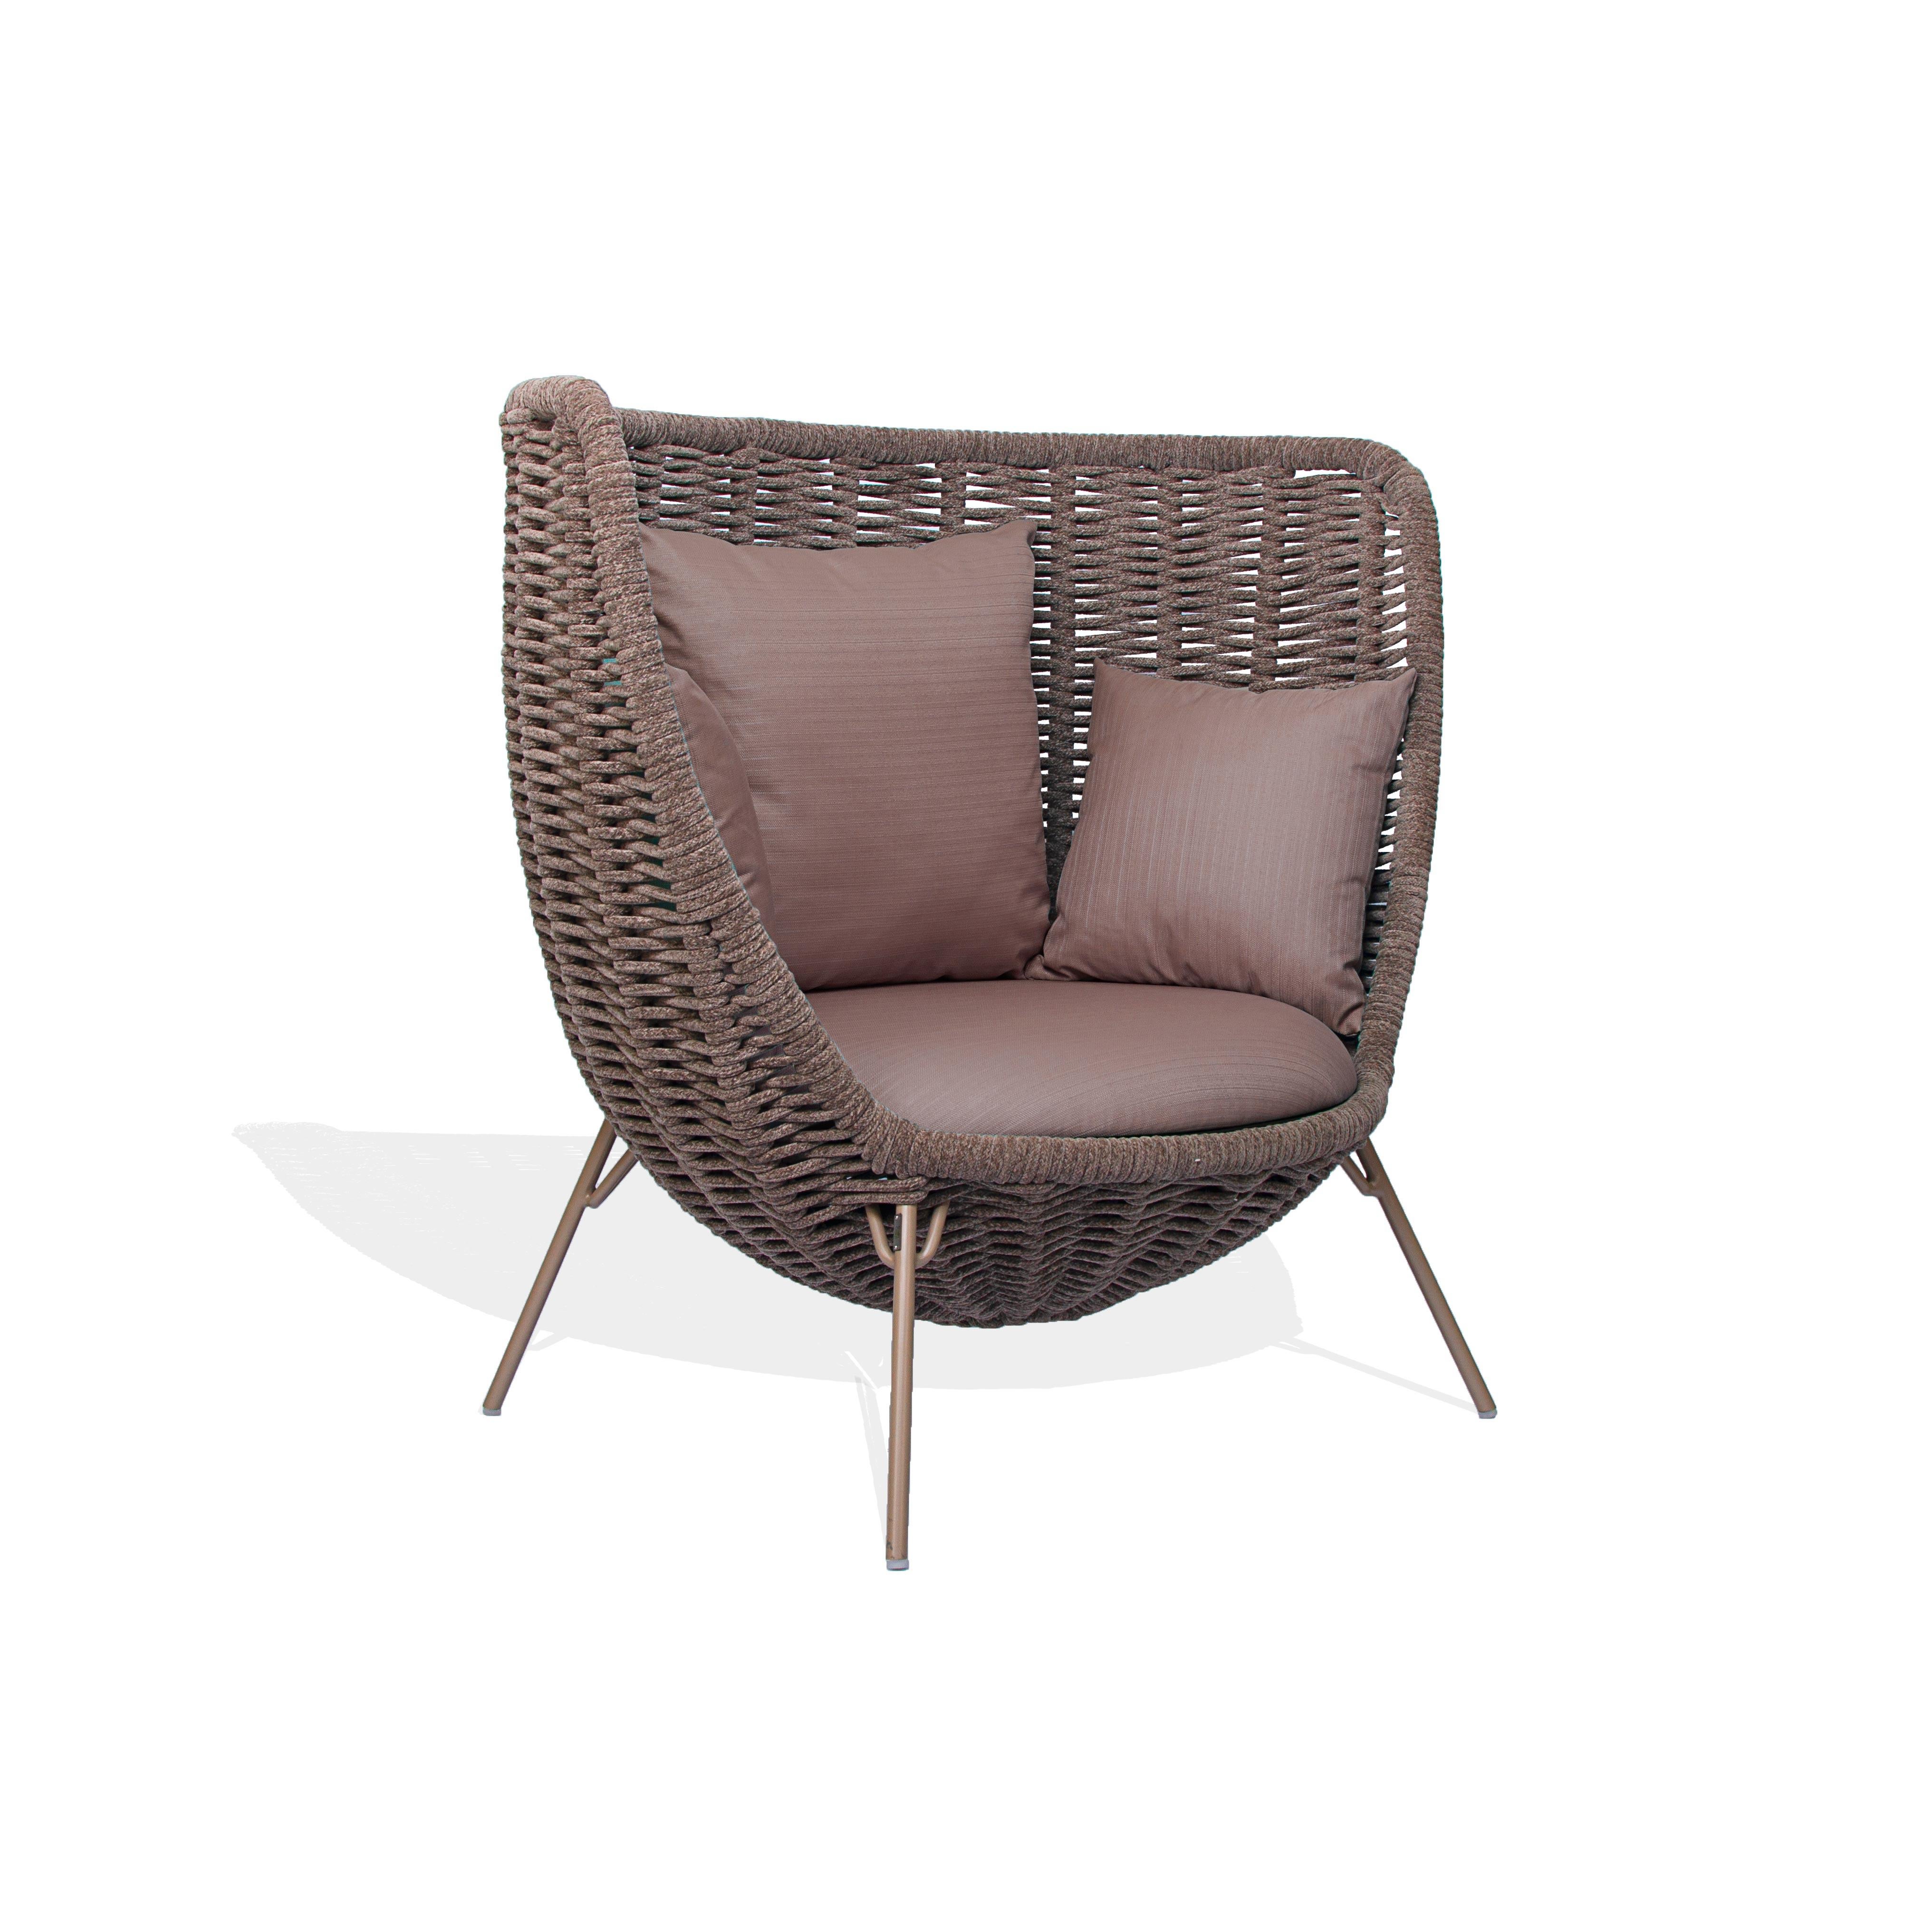 The elegant bearing matches the beauty and sophistication. The combination – which houses a retro blast – still combines comfort as a singular translation of Oiapoque armchair. Of Tupi-Guarani origin, the word oiapoque derives from the term